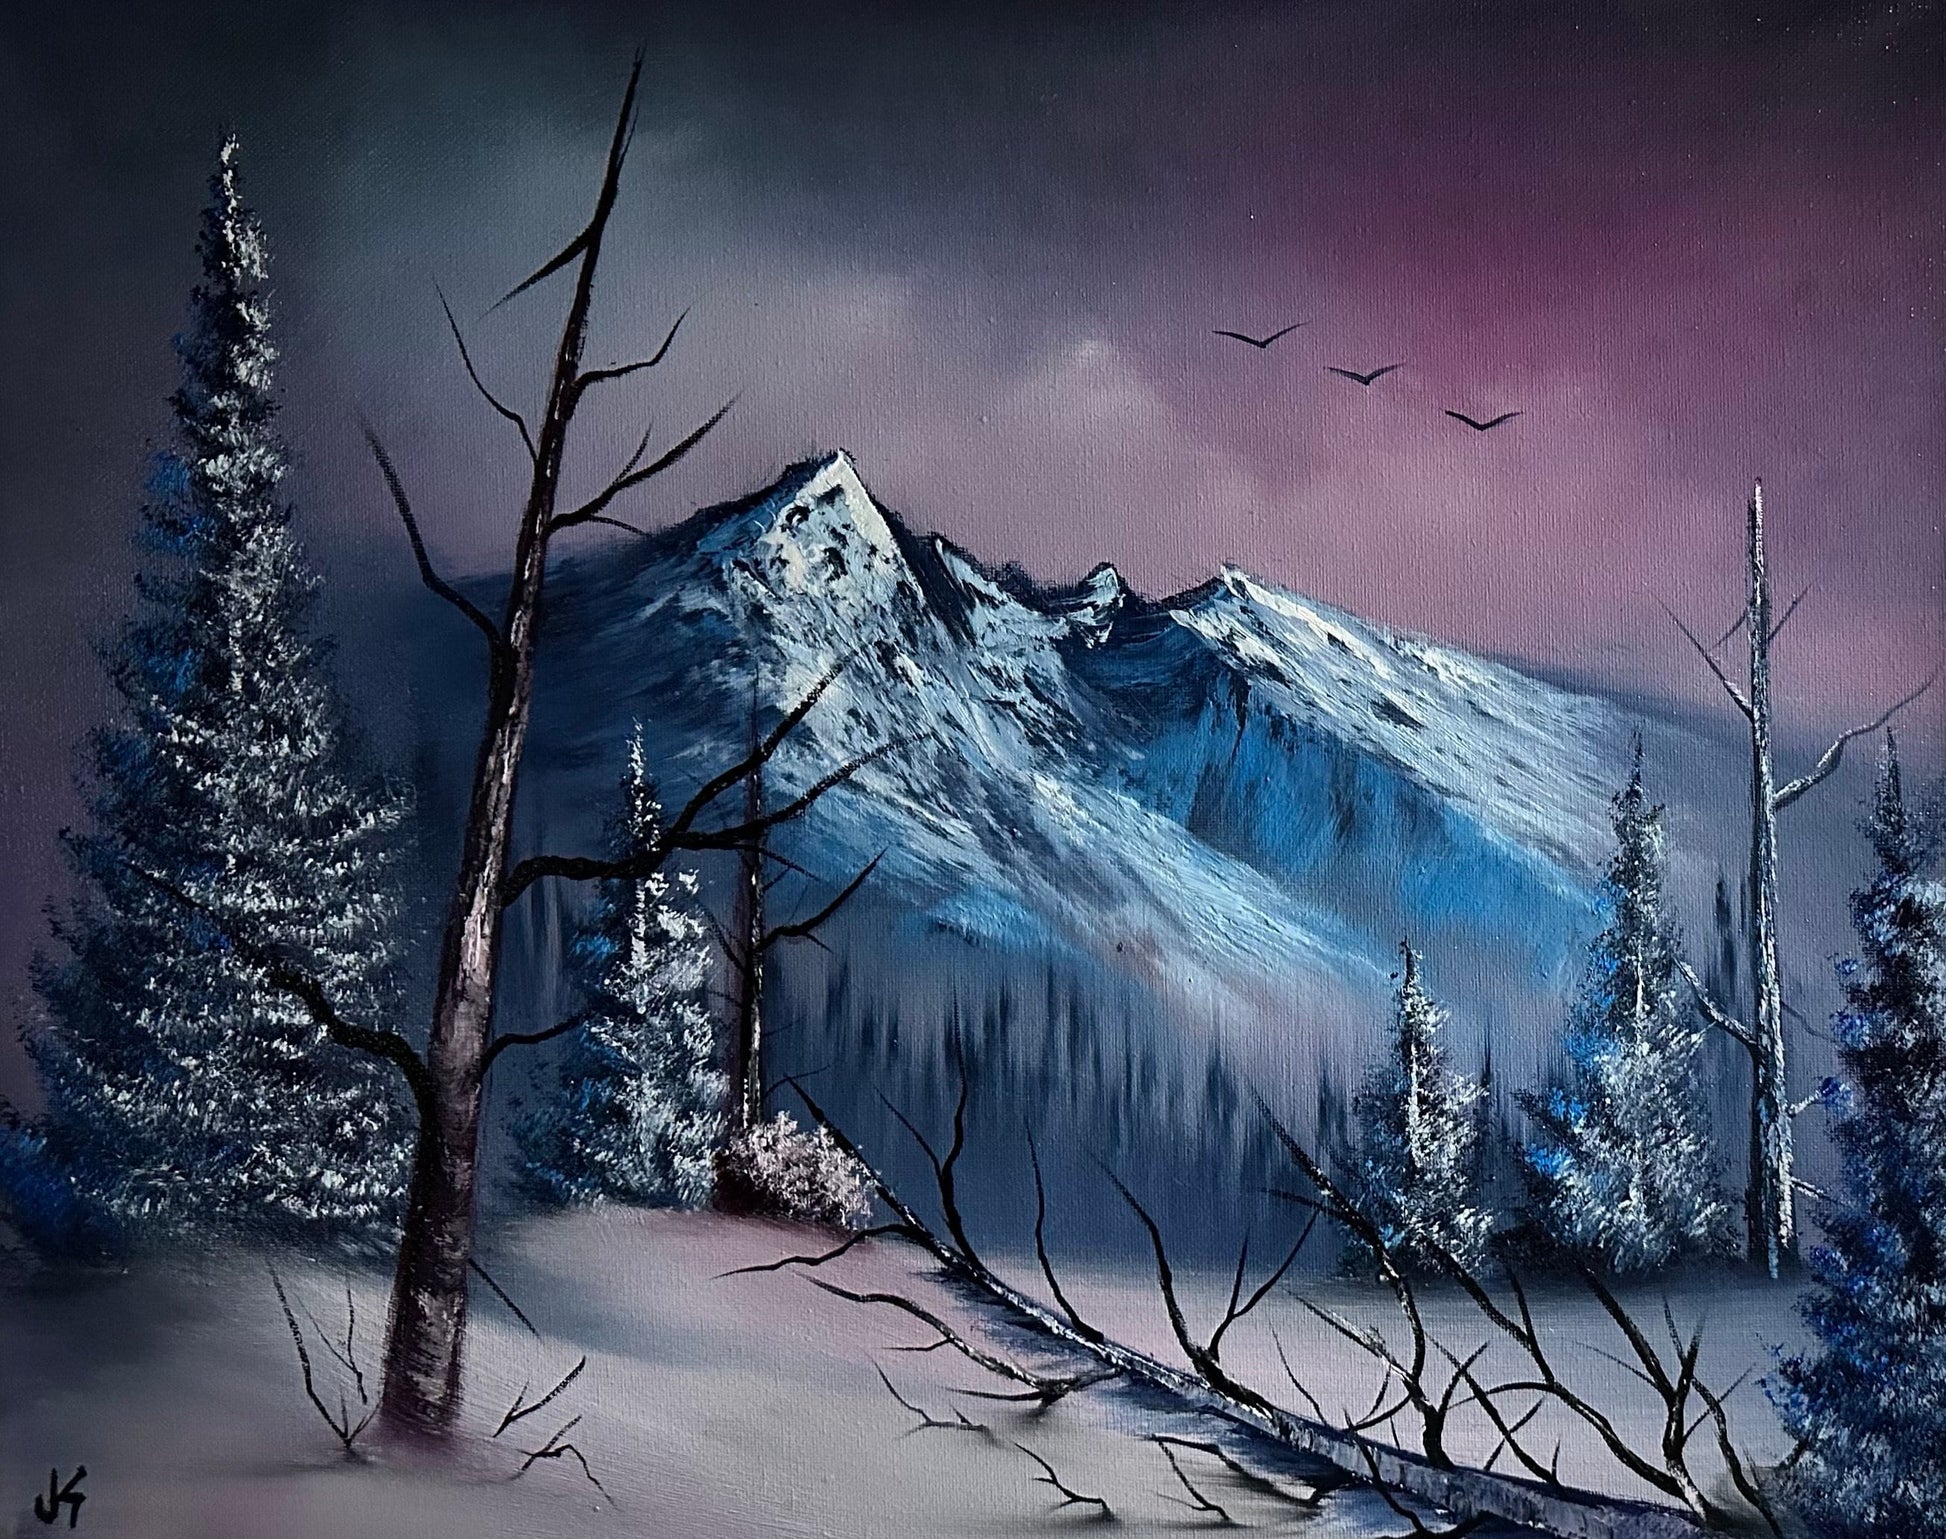 Painting 935 - 16x20" Canvas - Sunset Winter Oil Landscape painted Live on TikTok on 9/8/23 by PaintWithJosh